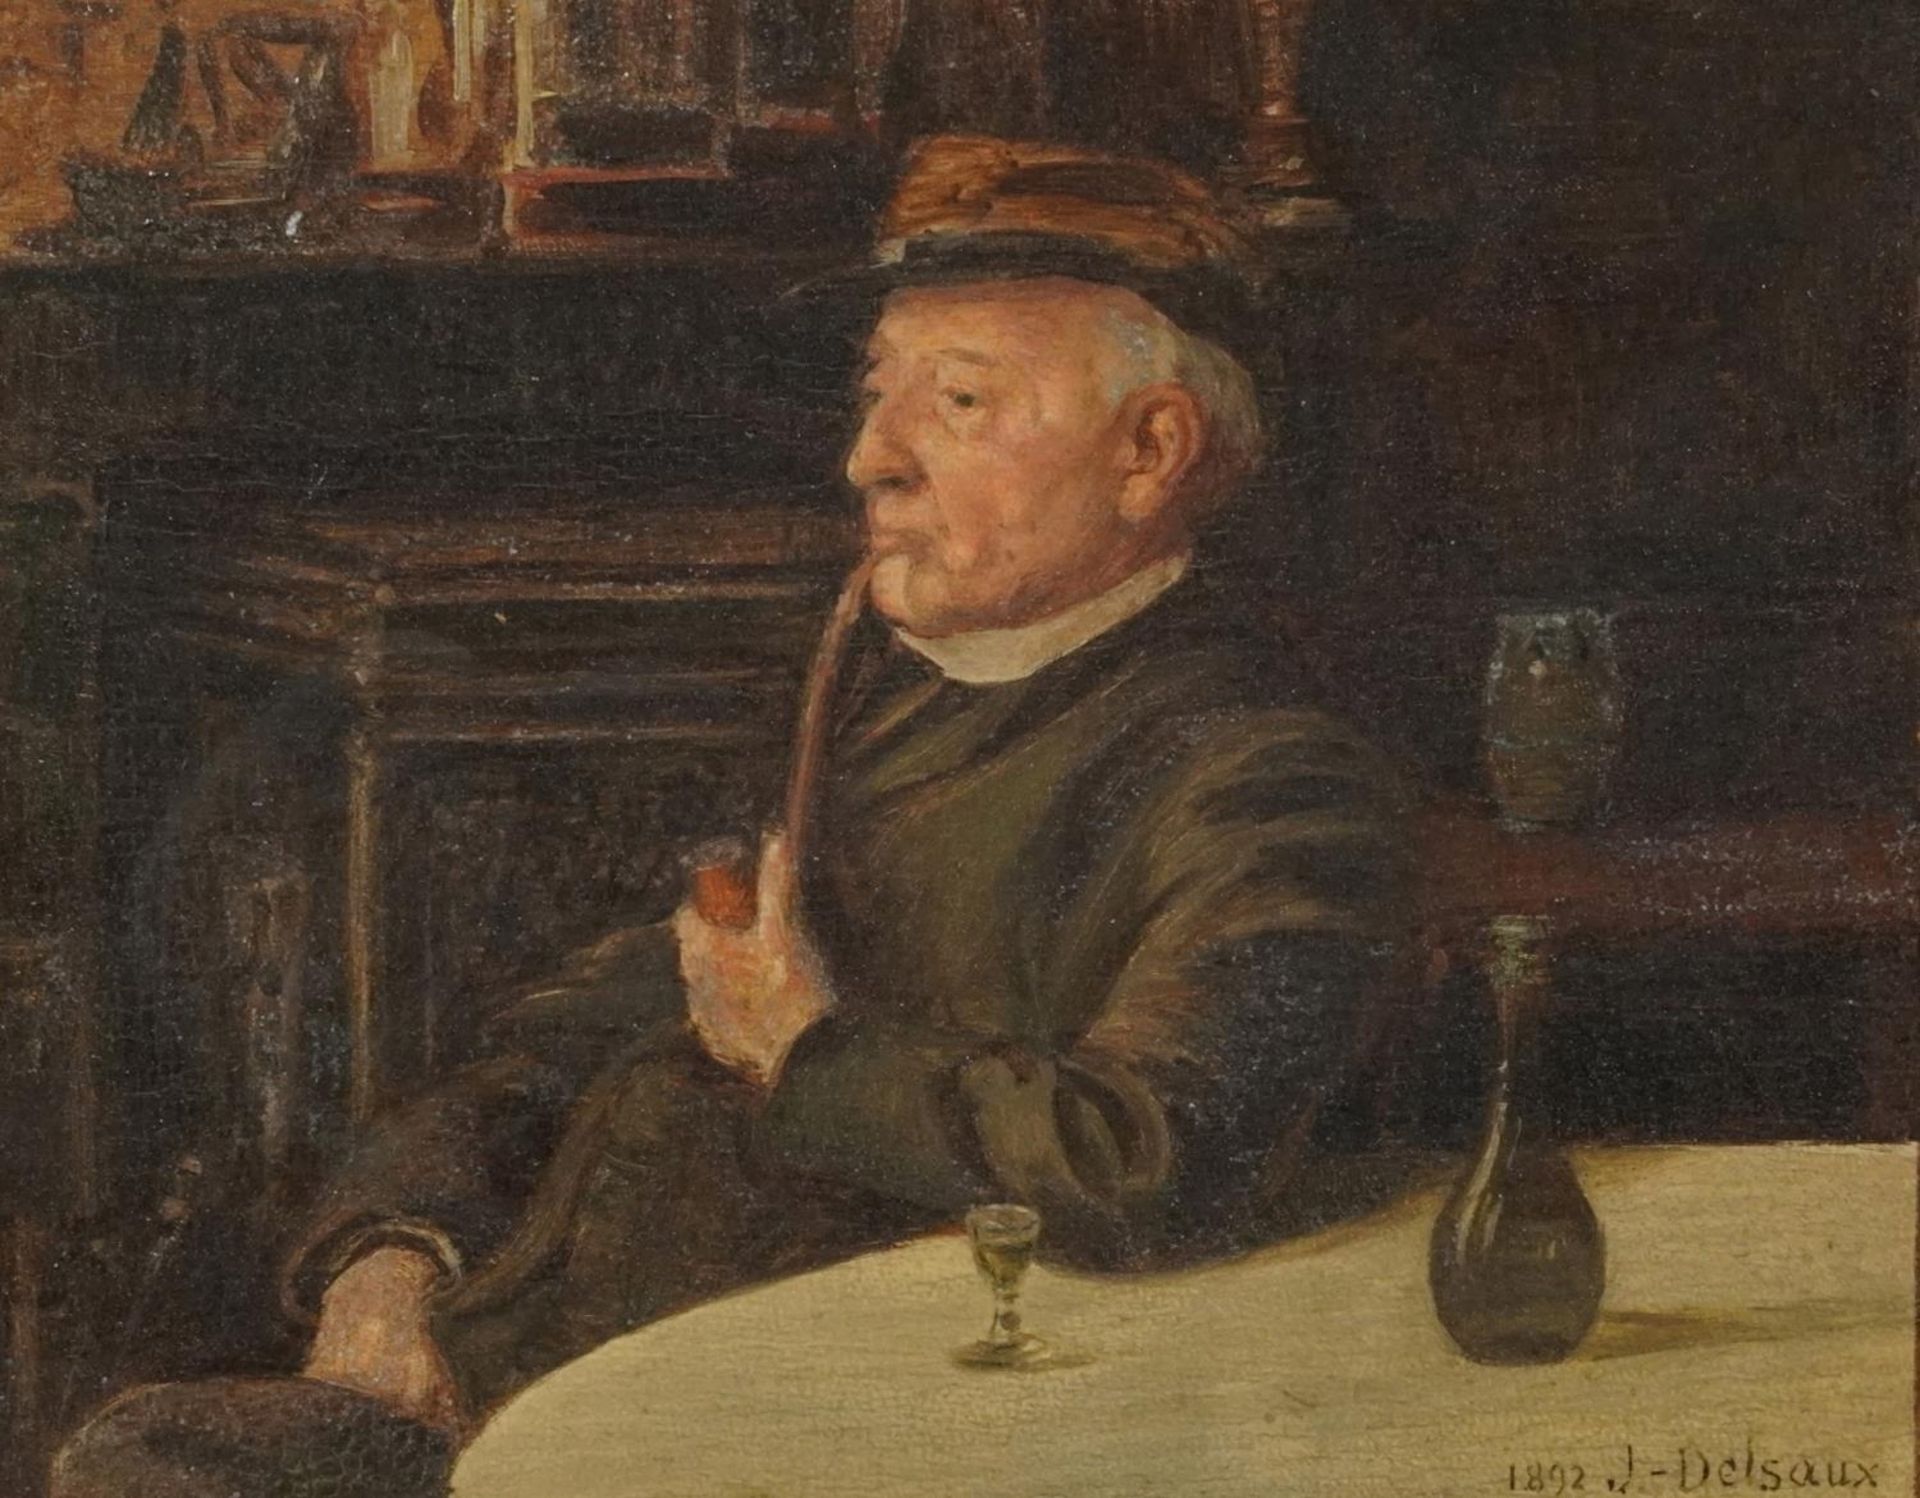 Jeremie Delsaux 1892 - Seated gentleman smoking a pipe in an interior, late 19th century French